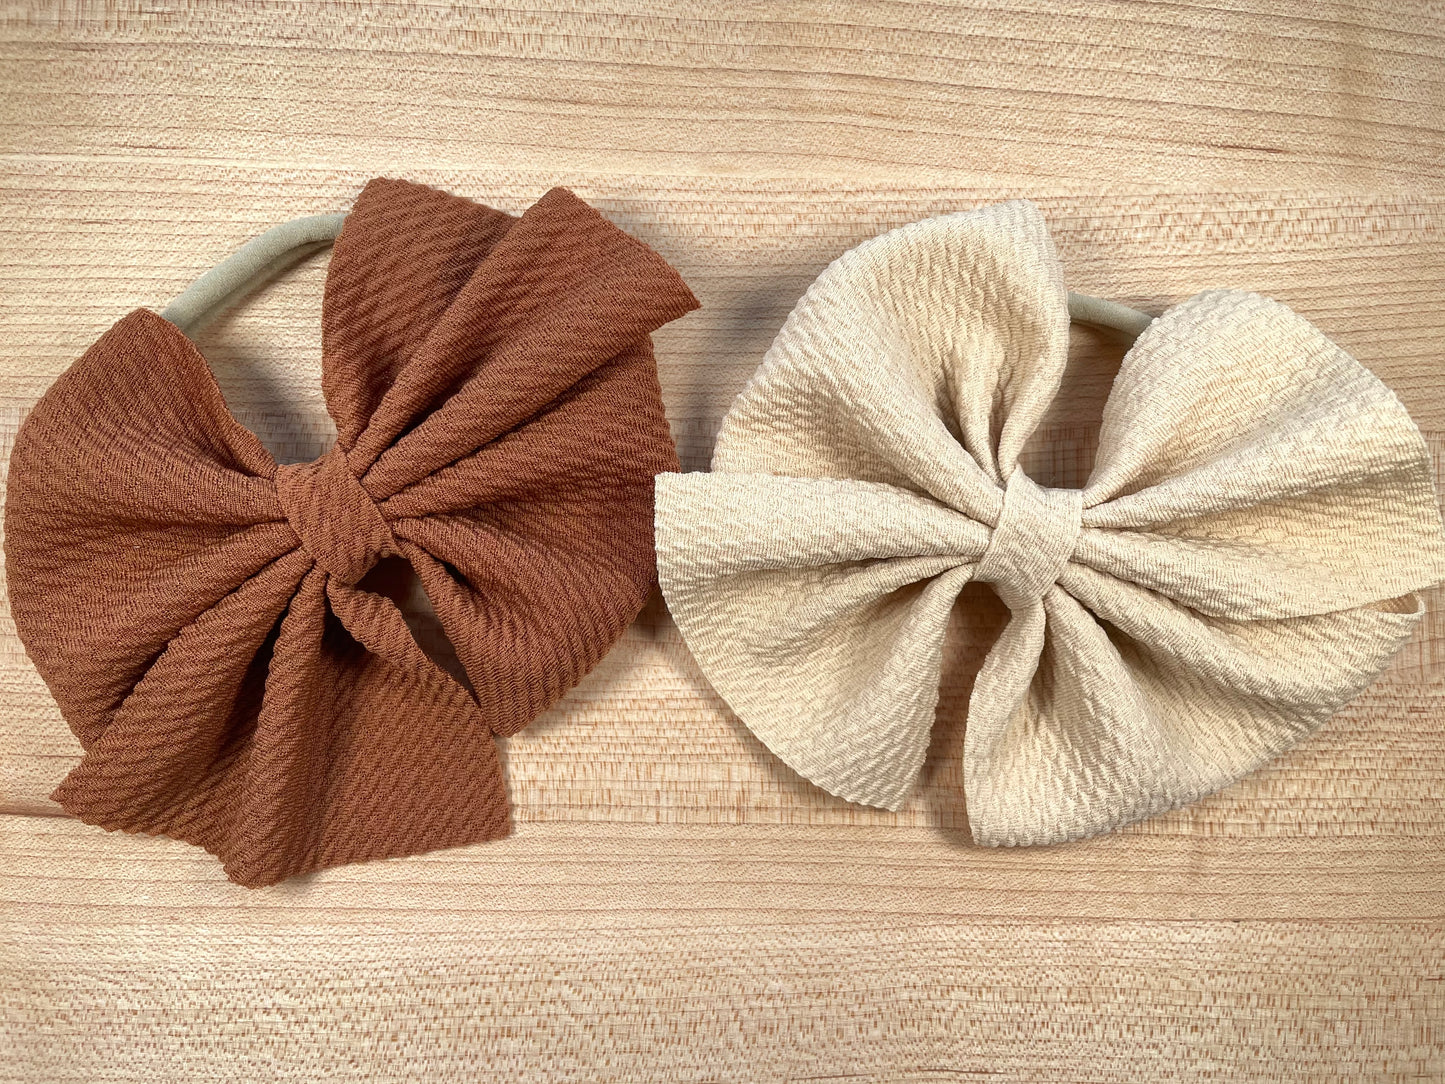 Bullet Textured Bow - Neutral Colors